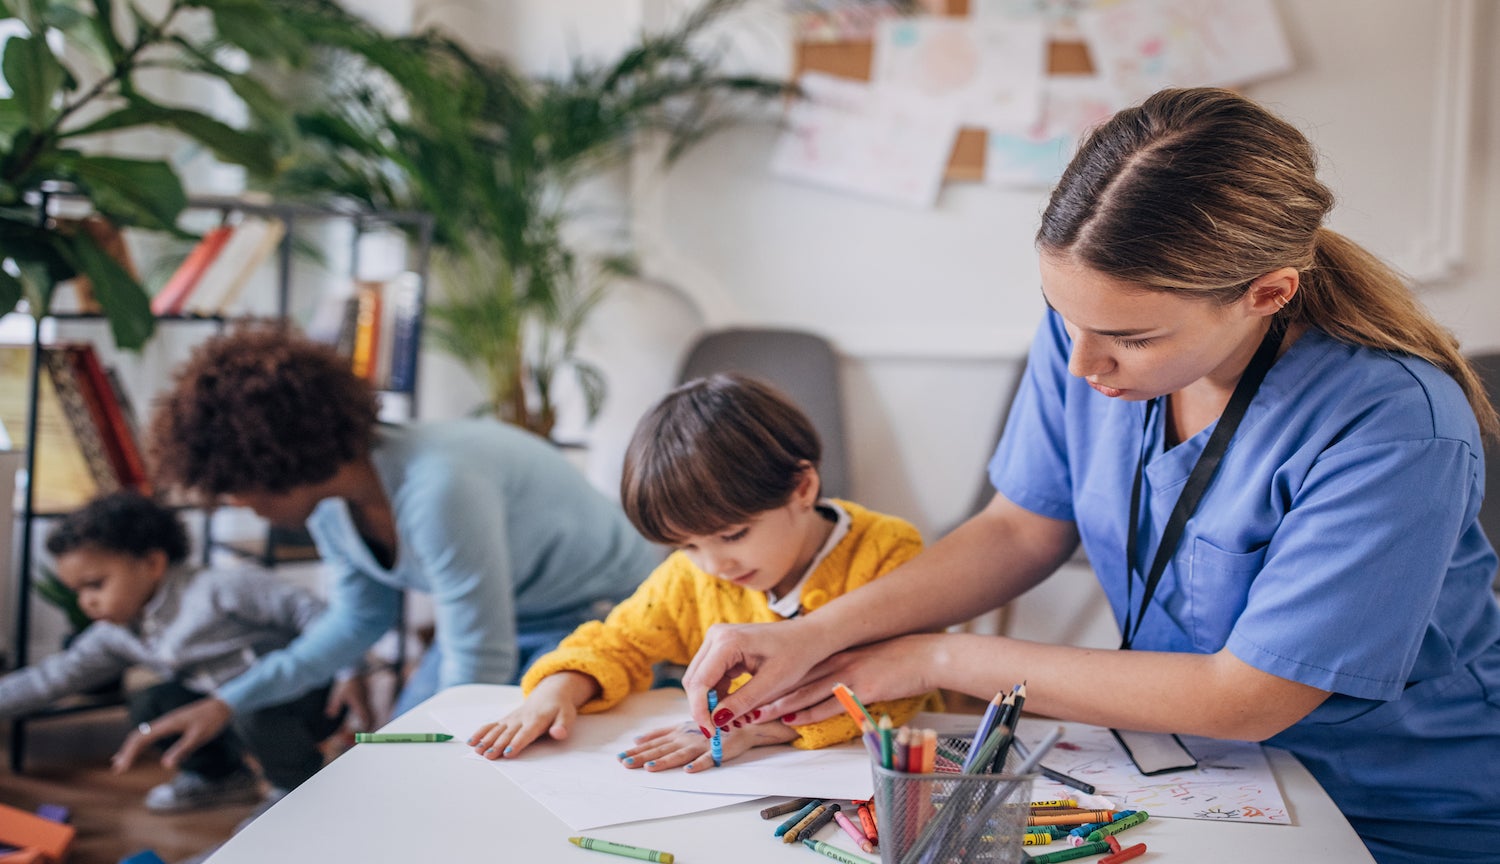 Nurse assisting child with coloring